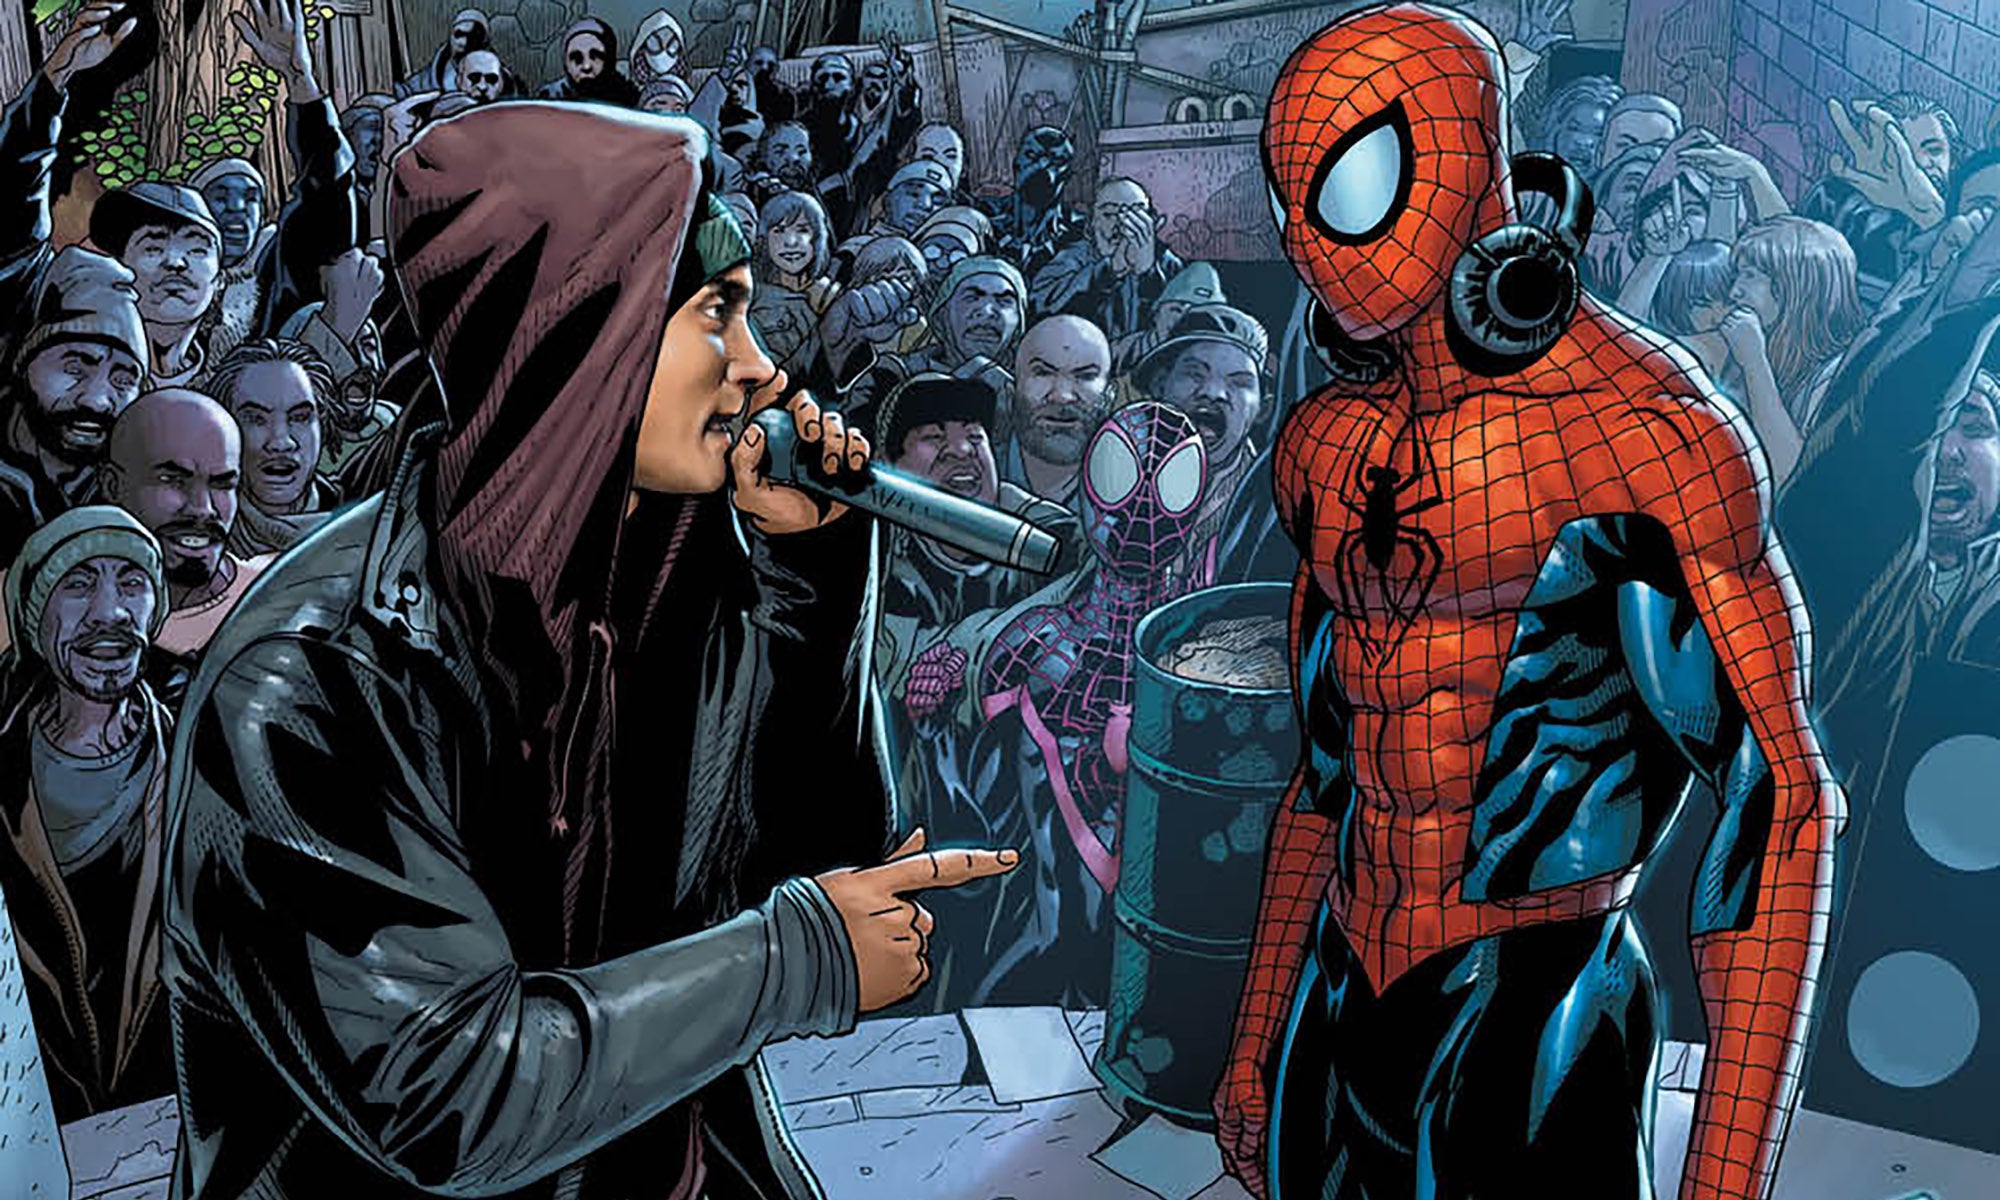 Eminem partners with Spider-Man and Marvel for another comic collaboration  | Popverse